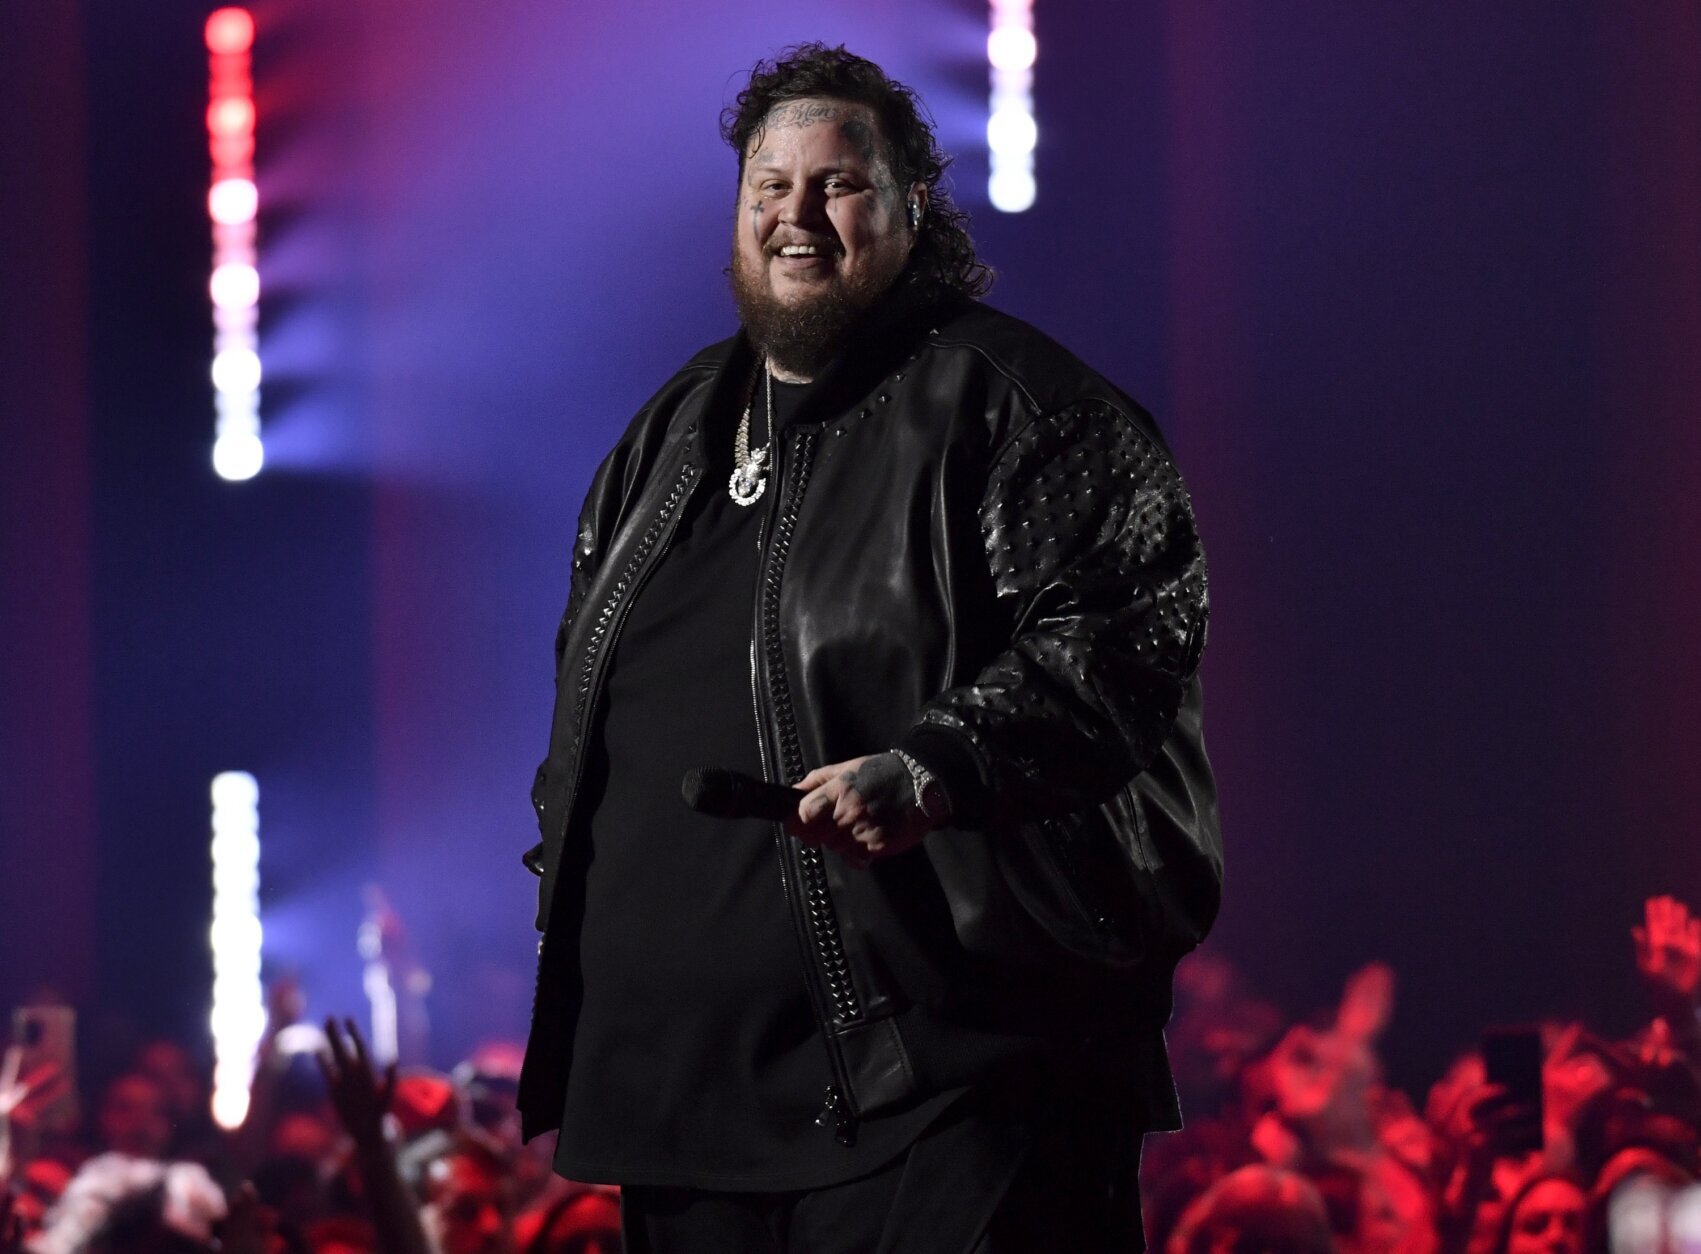 ‘Son of a Sinner’ Jelly Roll reigns at CMT Music Awards show - WTOP News